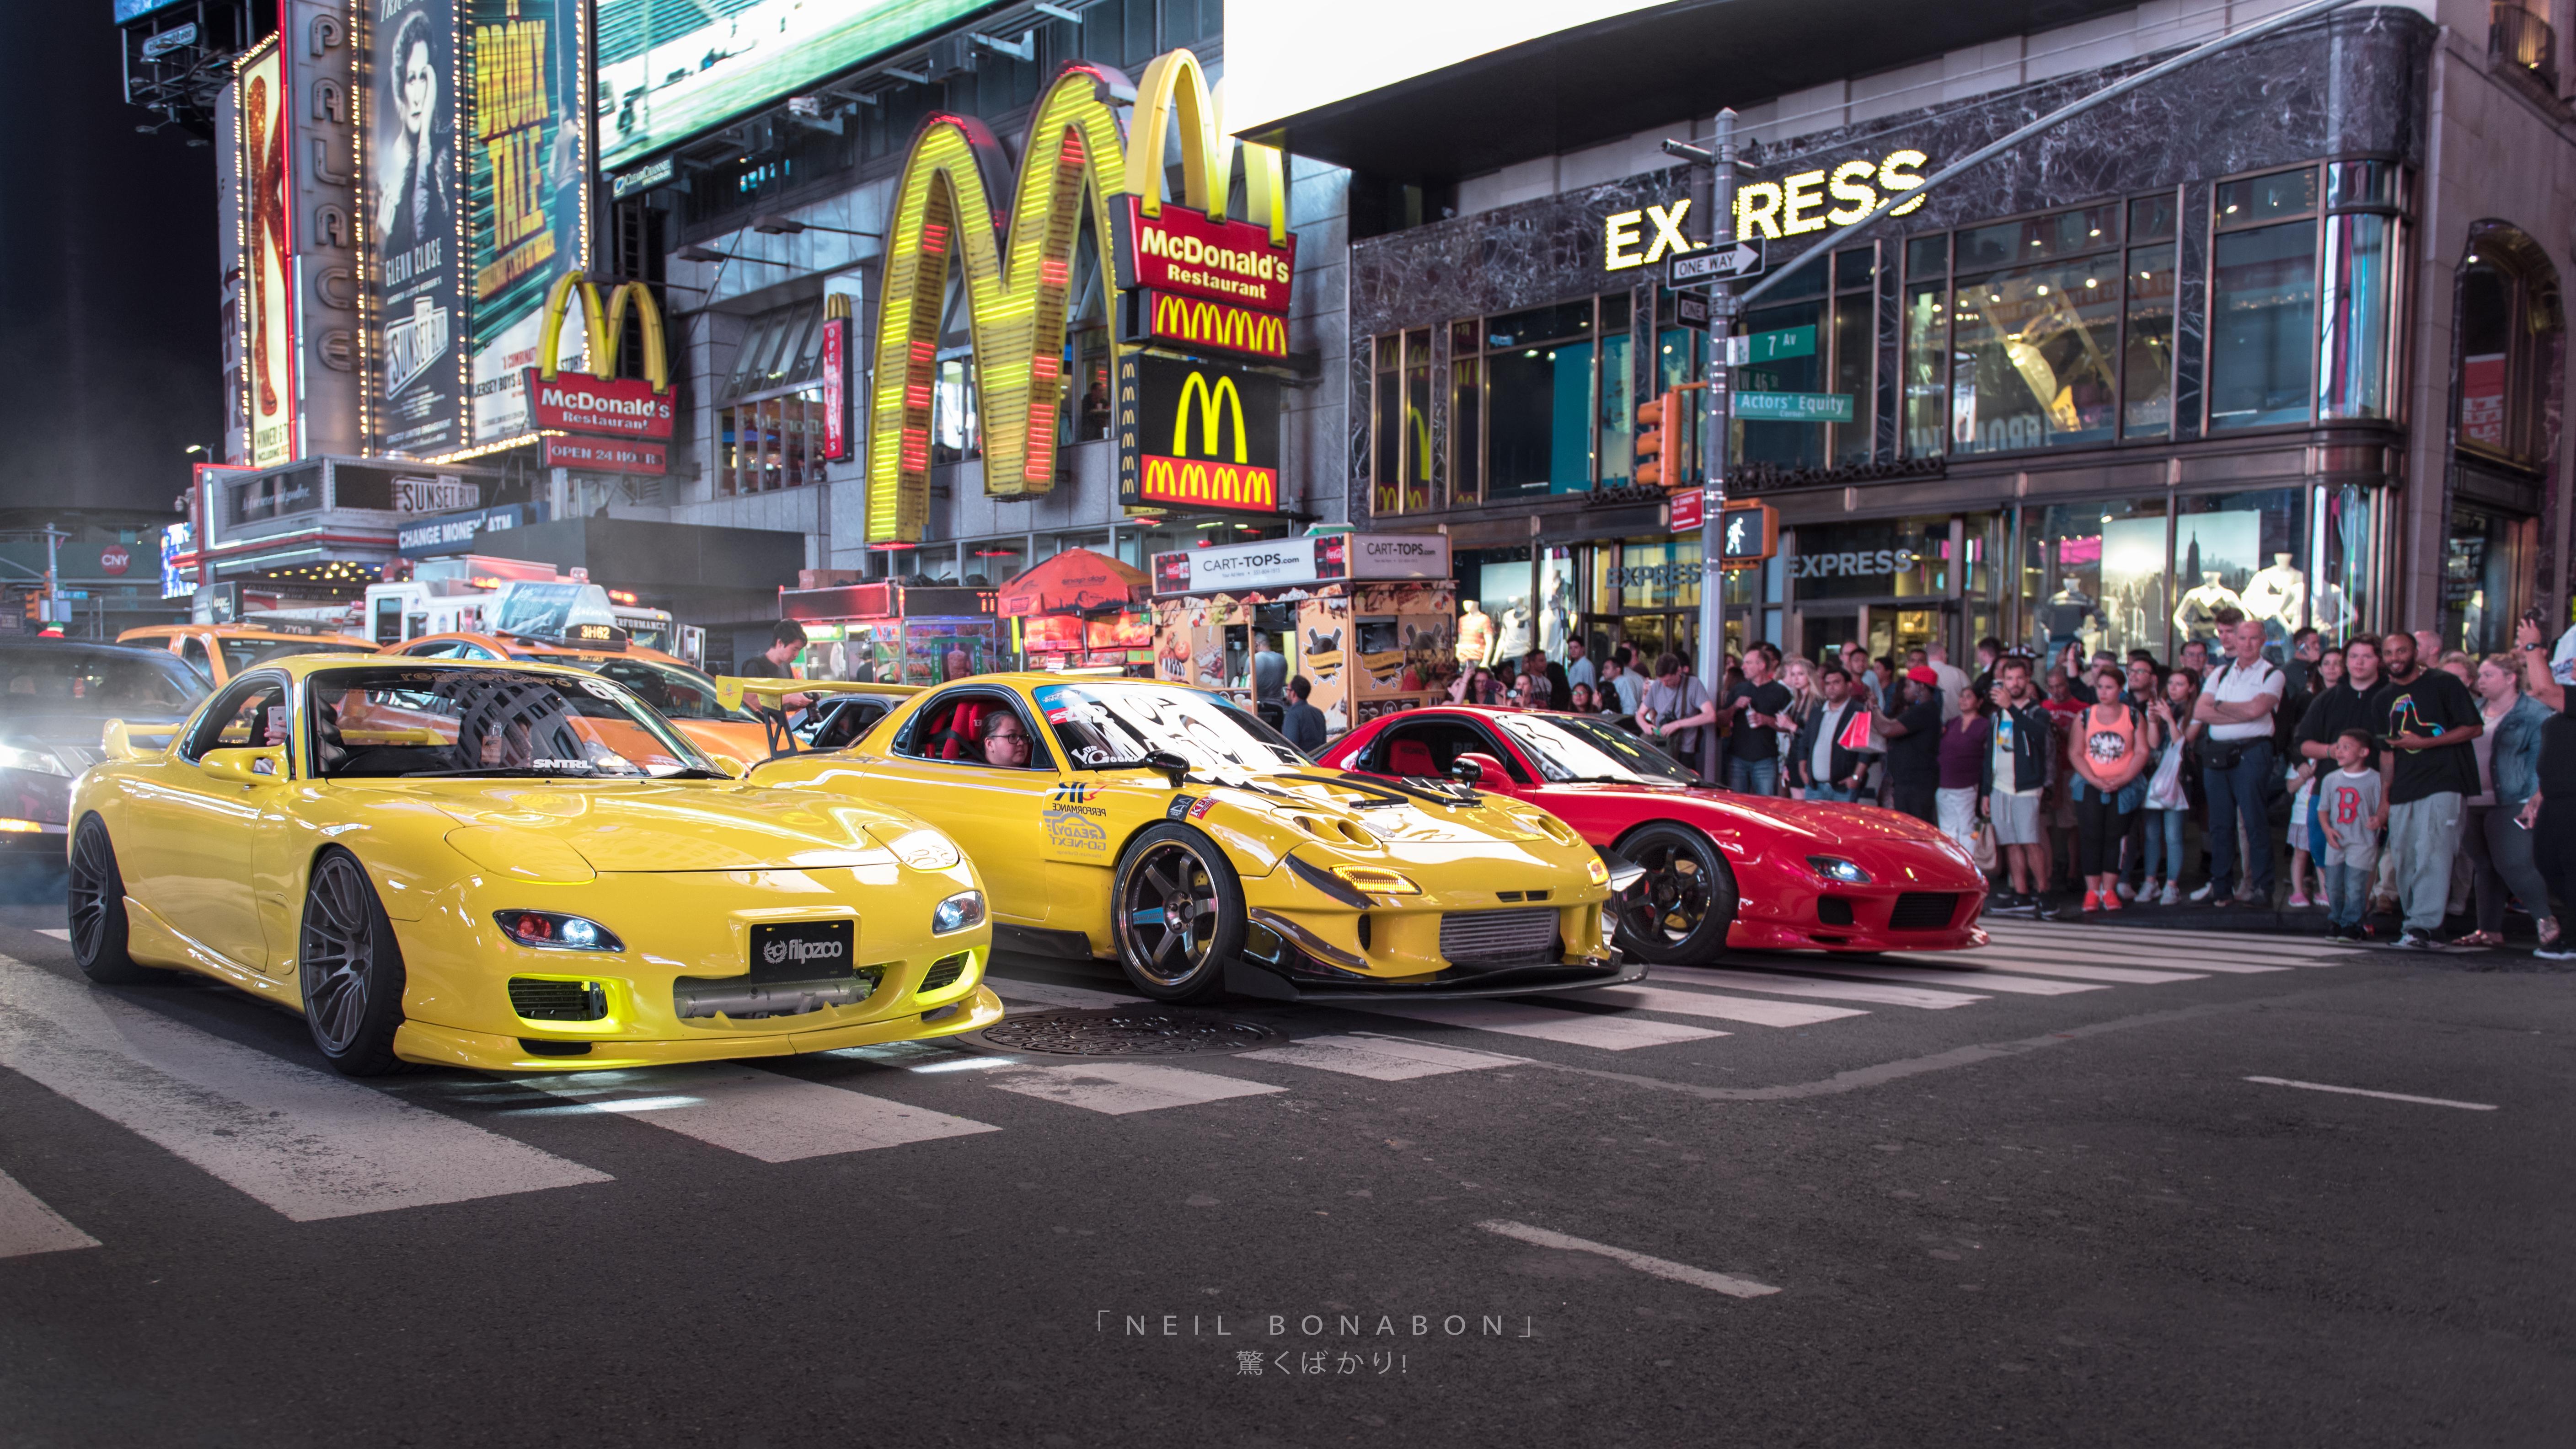 Your Ridiculously Awesome Mazda RX 7 Wallpaper Is Here